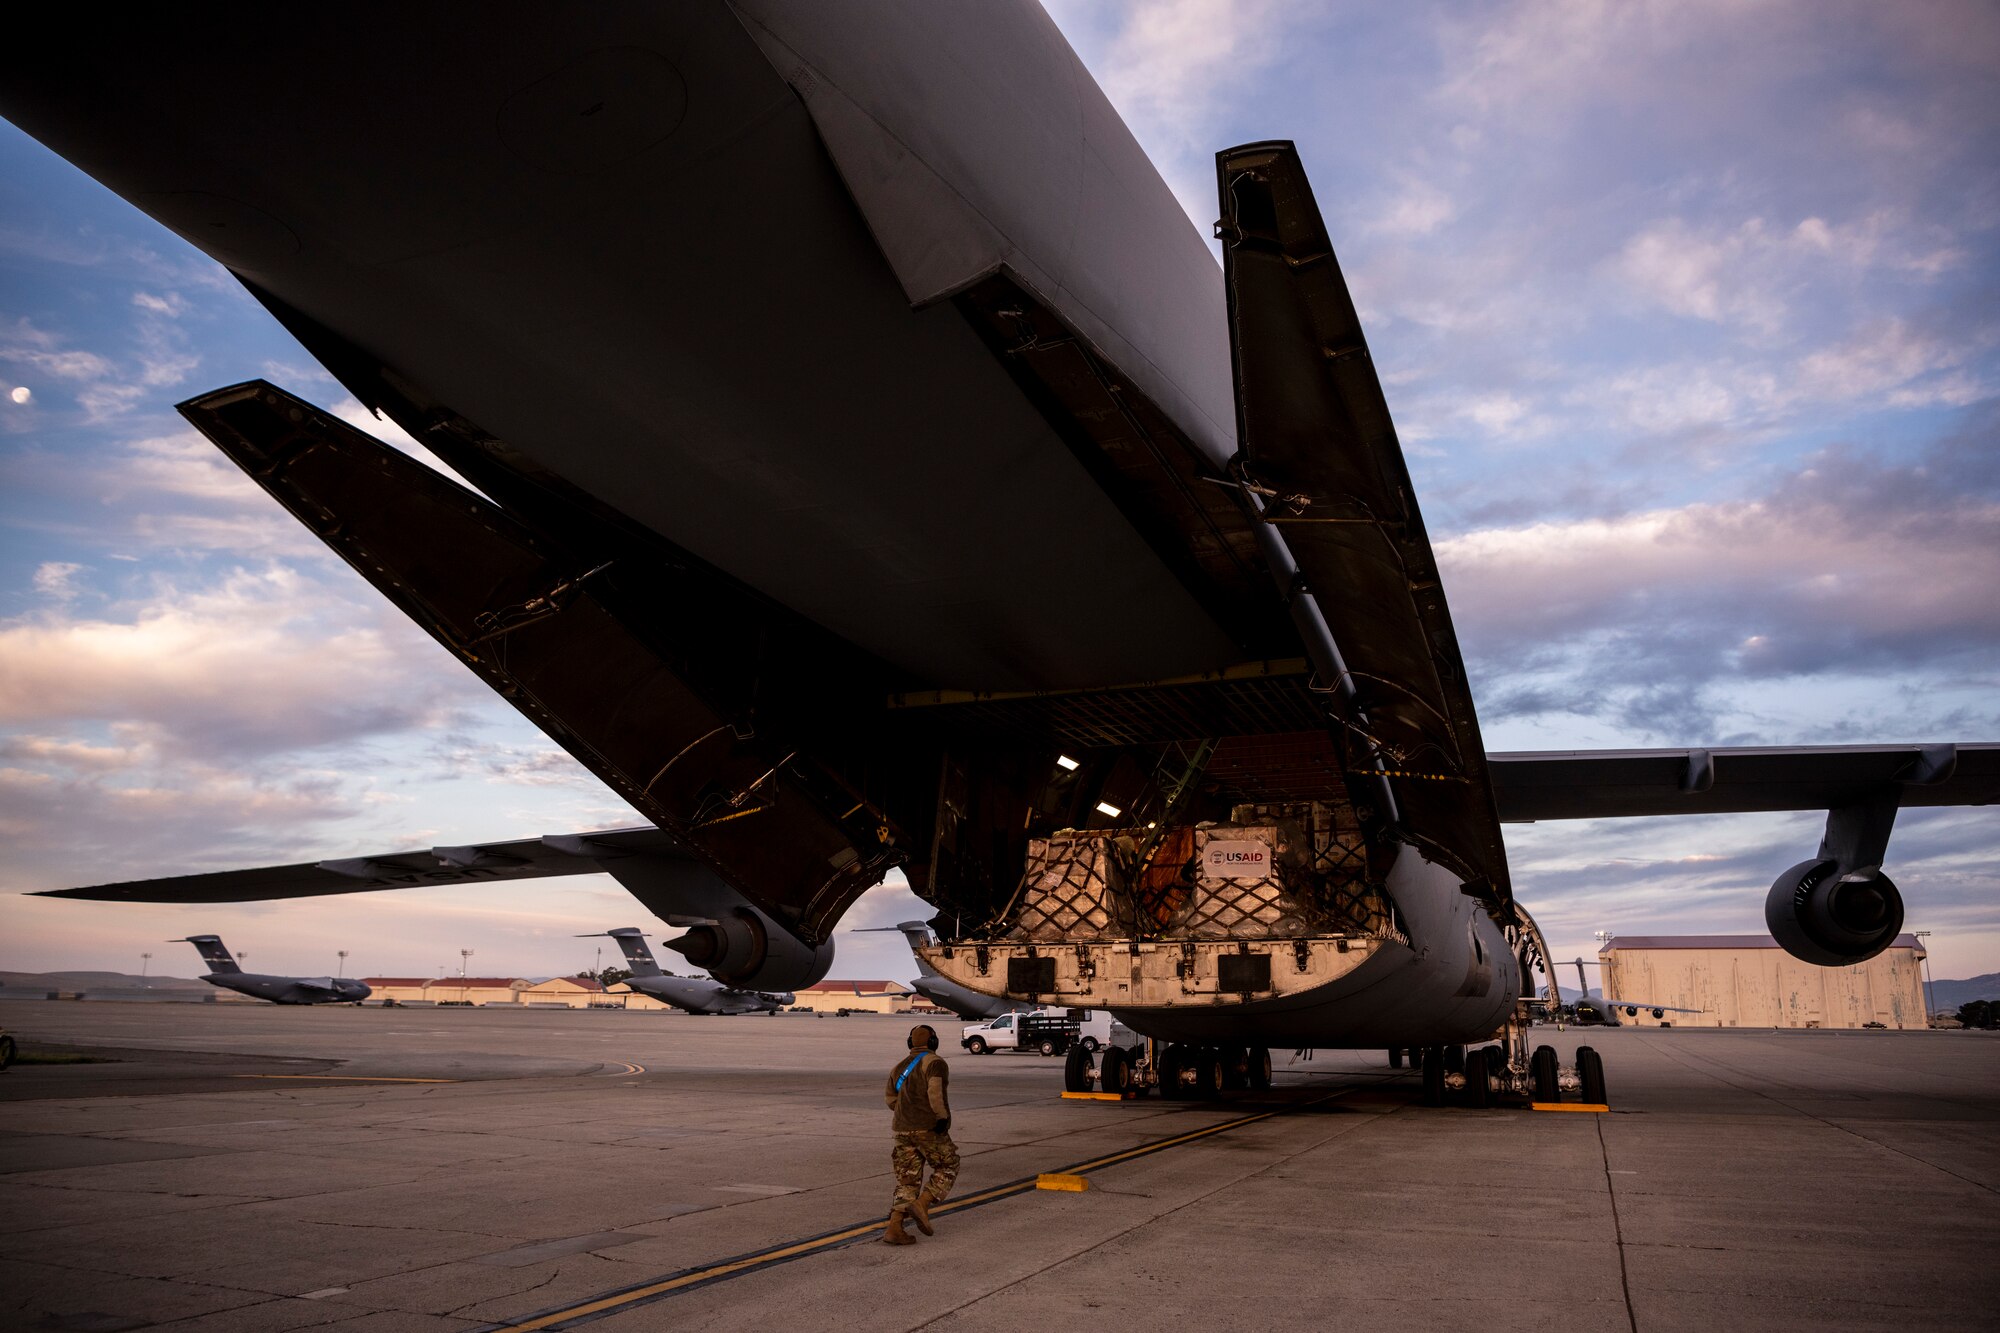 An Airmen walks towards the back of a large grey military aircraft full of pallets with USAID signs on them.